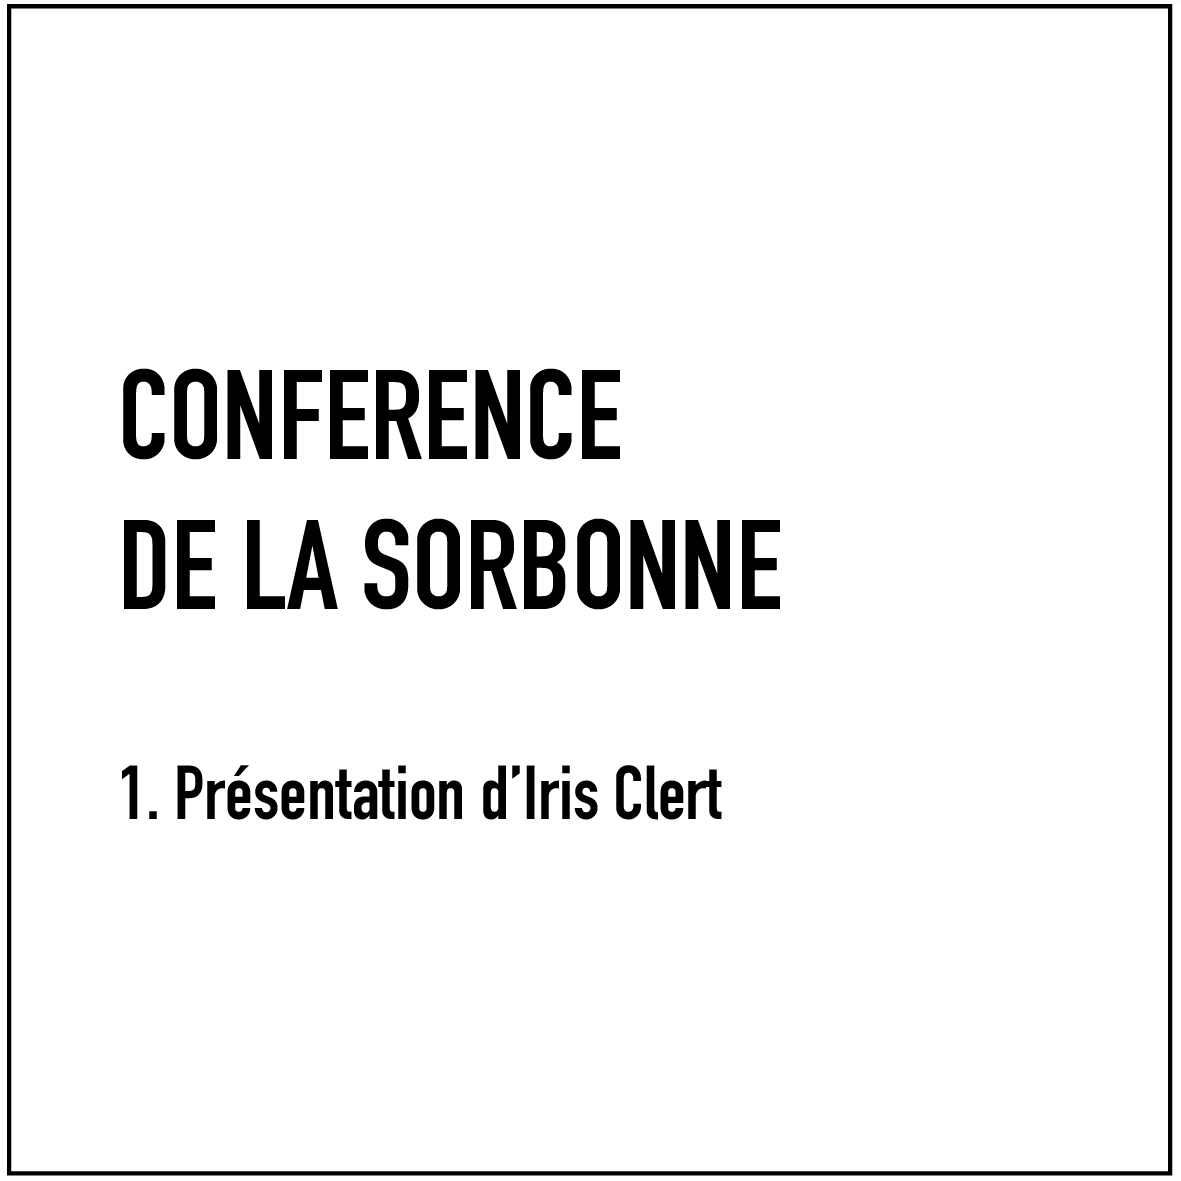 Lecture at the Sorbonne - 1. Introduction by Iris Clert